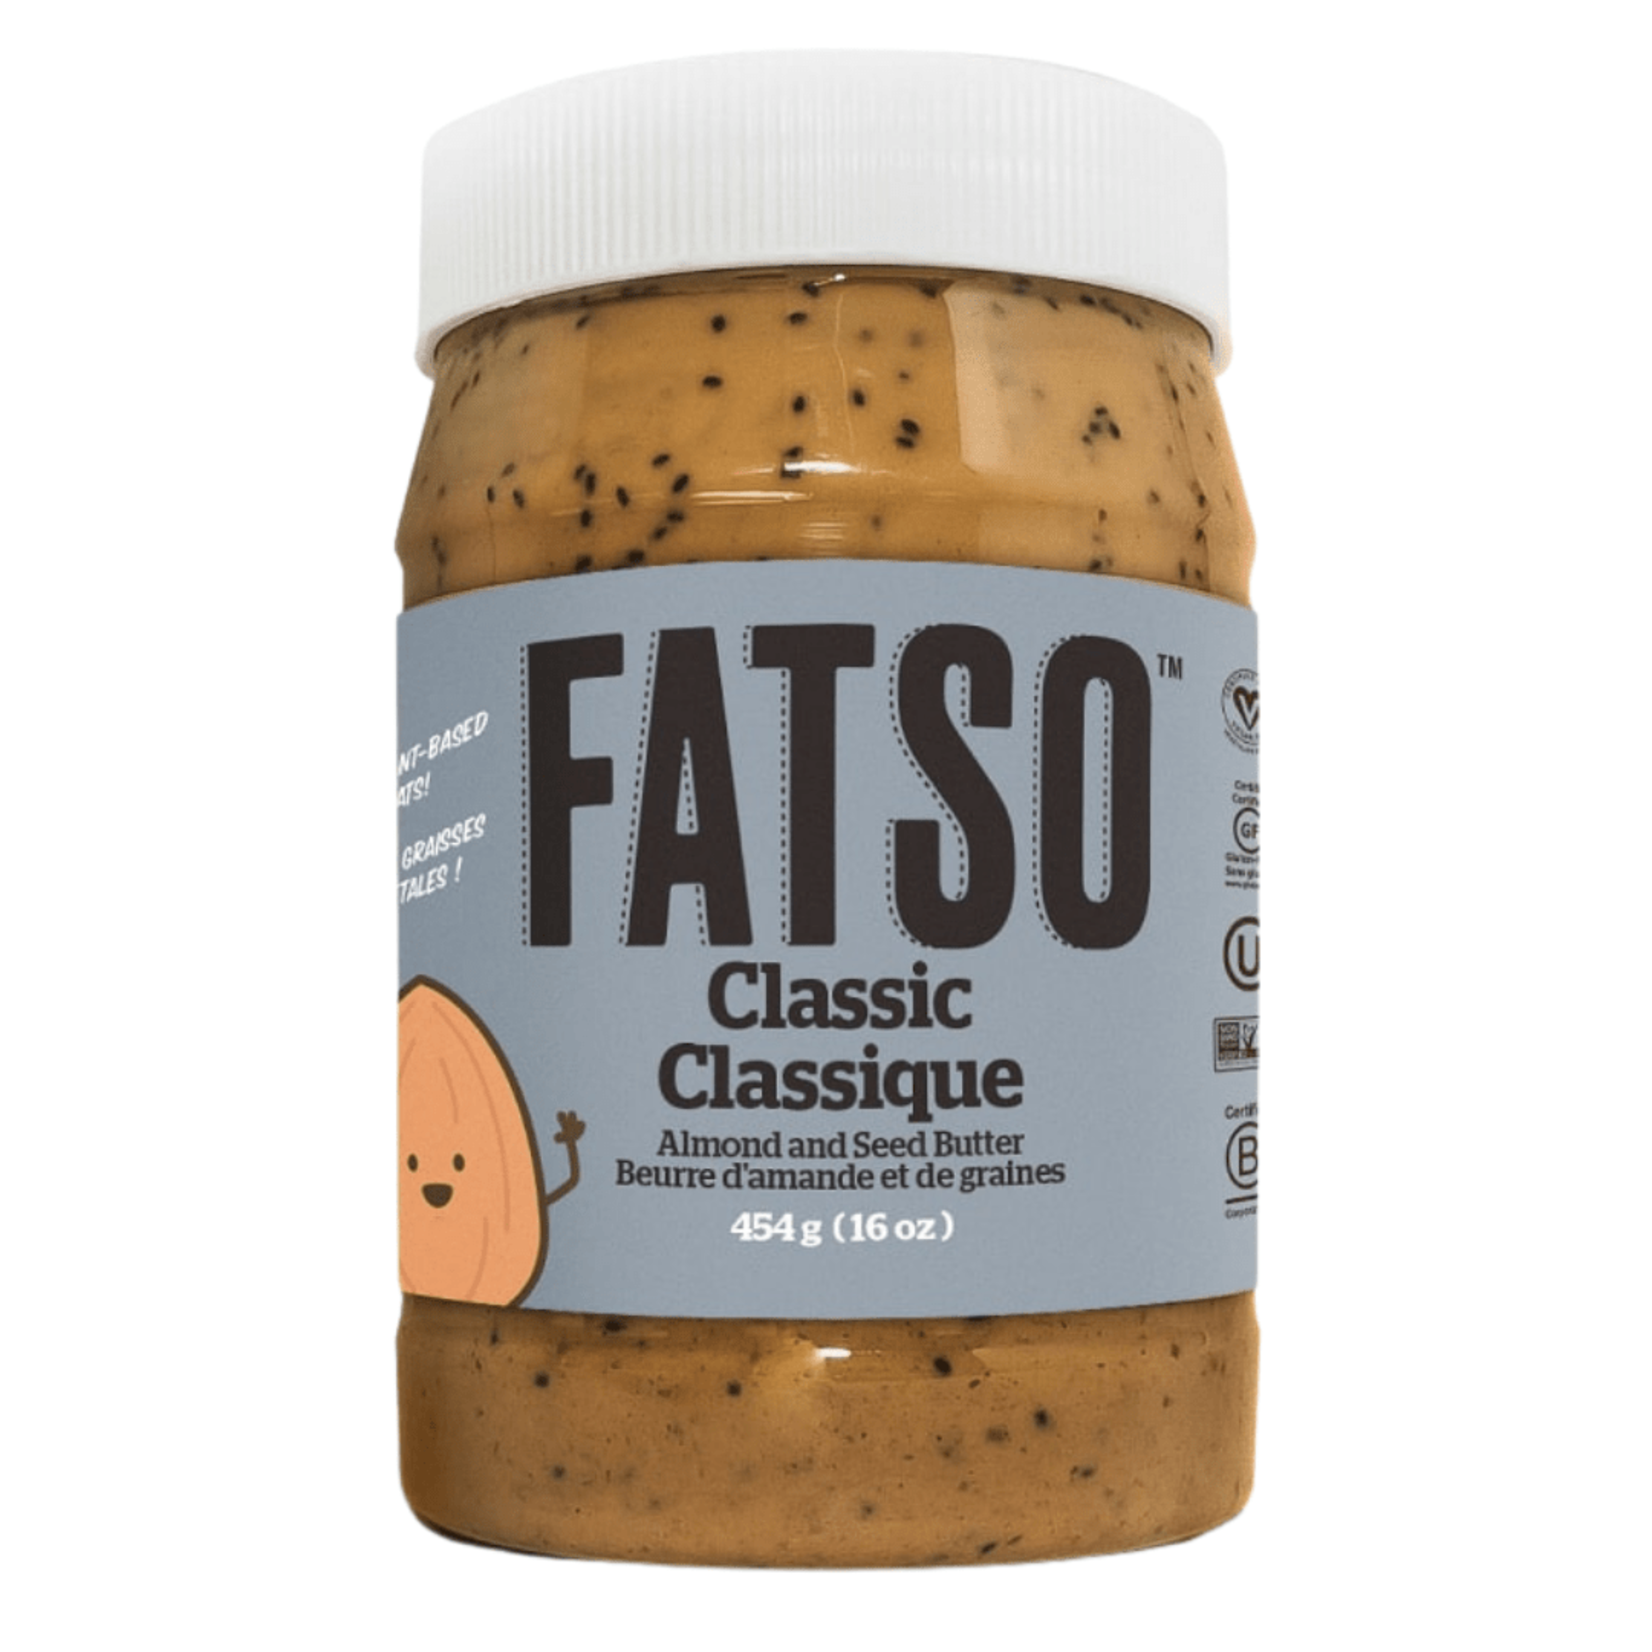 Fatso Fatso Classic Almond and Seed Butter